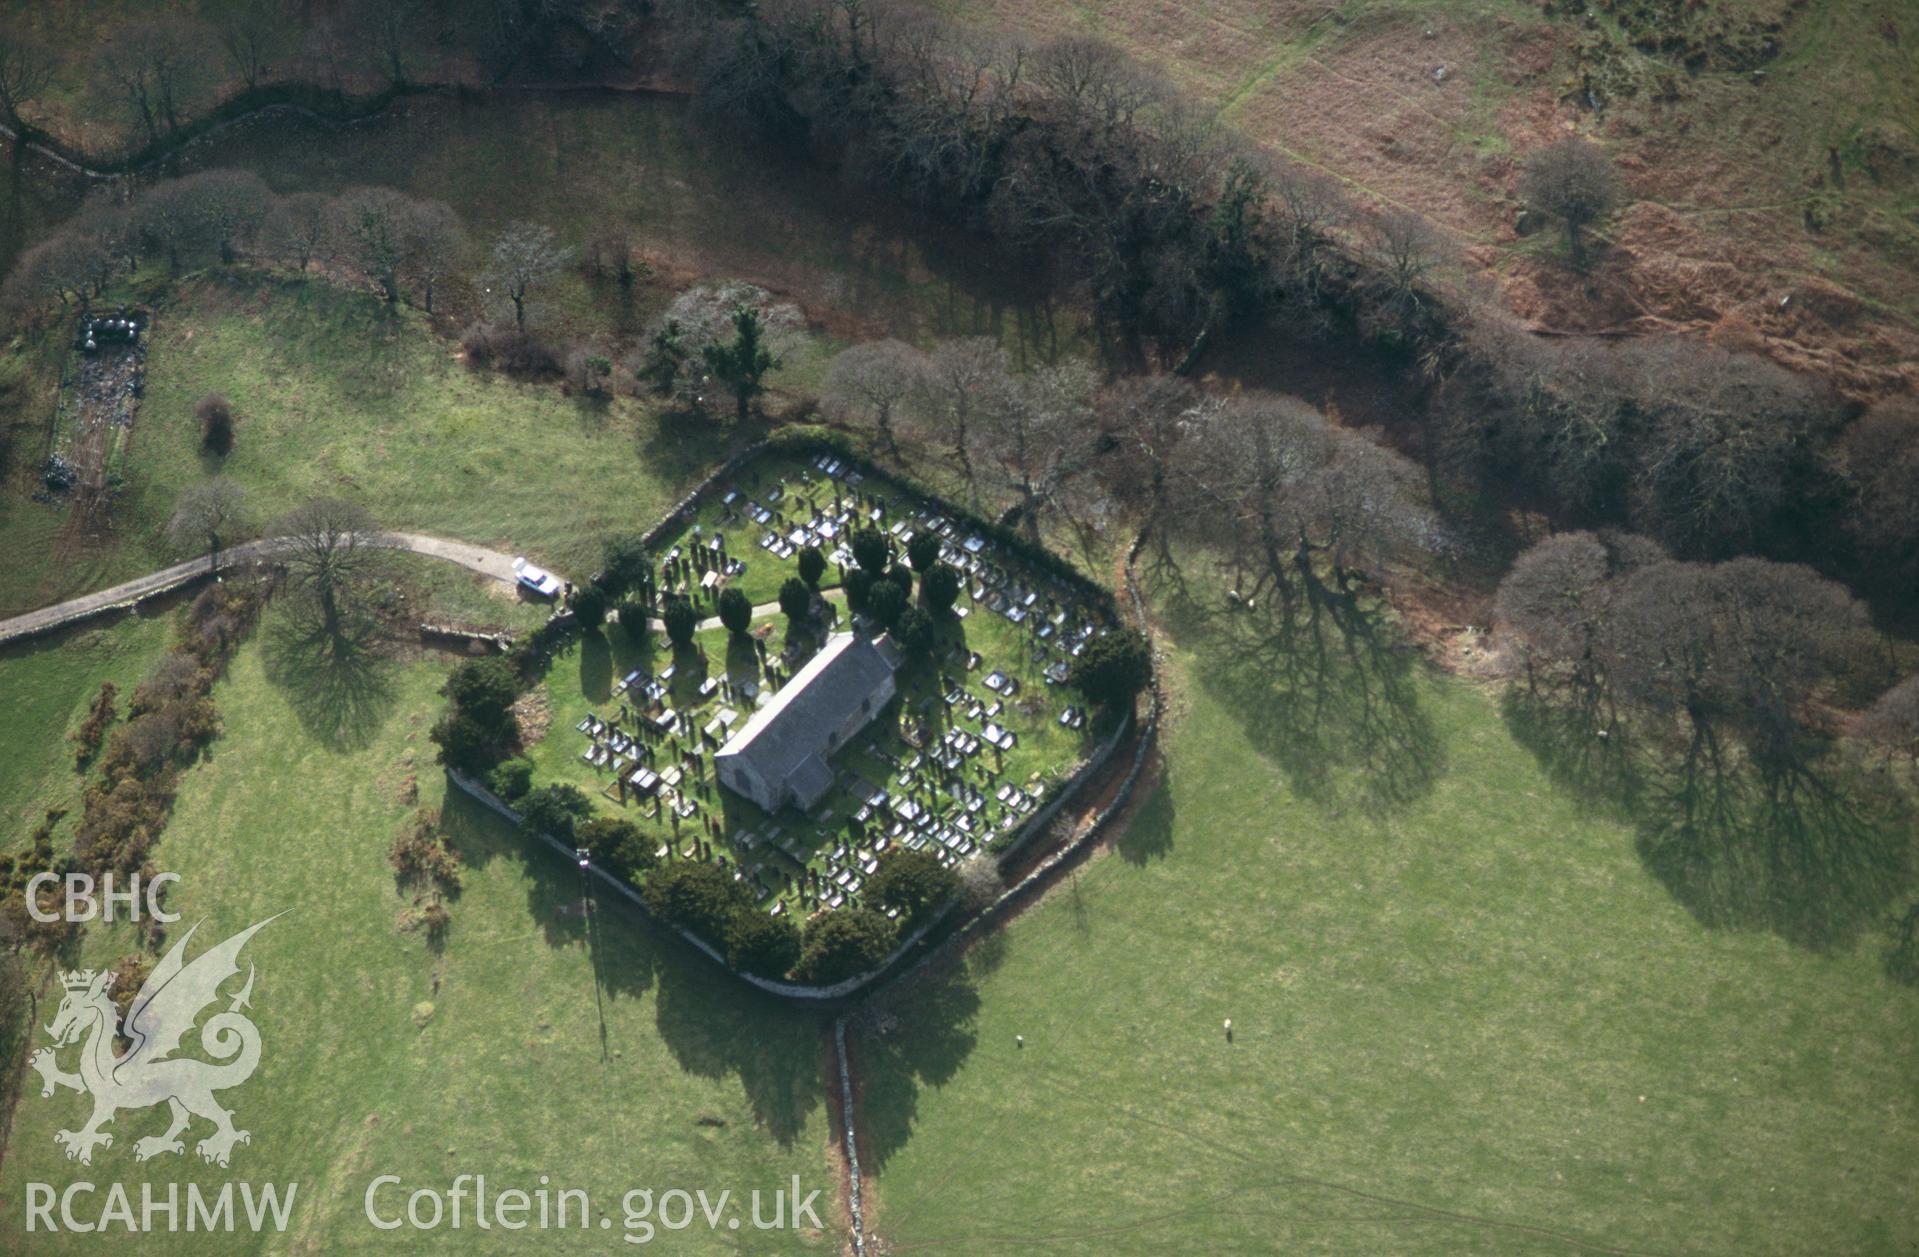 RCAHMW colour slide oblique aerial photograph of St Michael's Church, Talsarnau, taken by C.R.Musson on the 30/03/1996